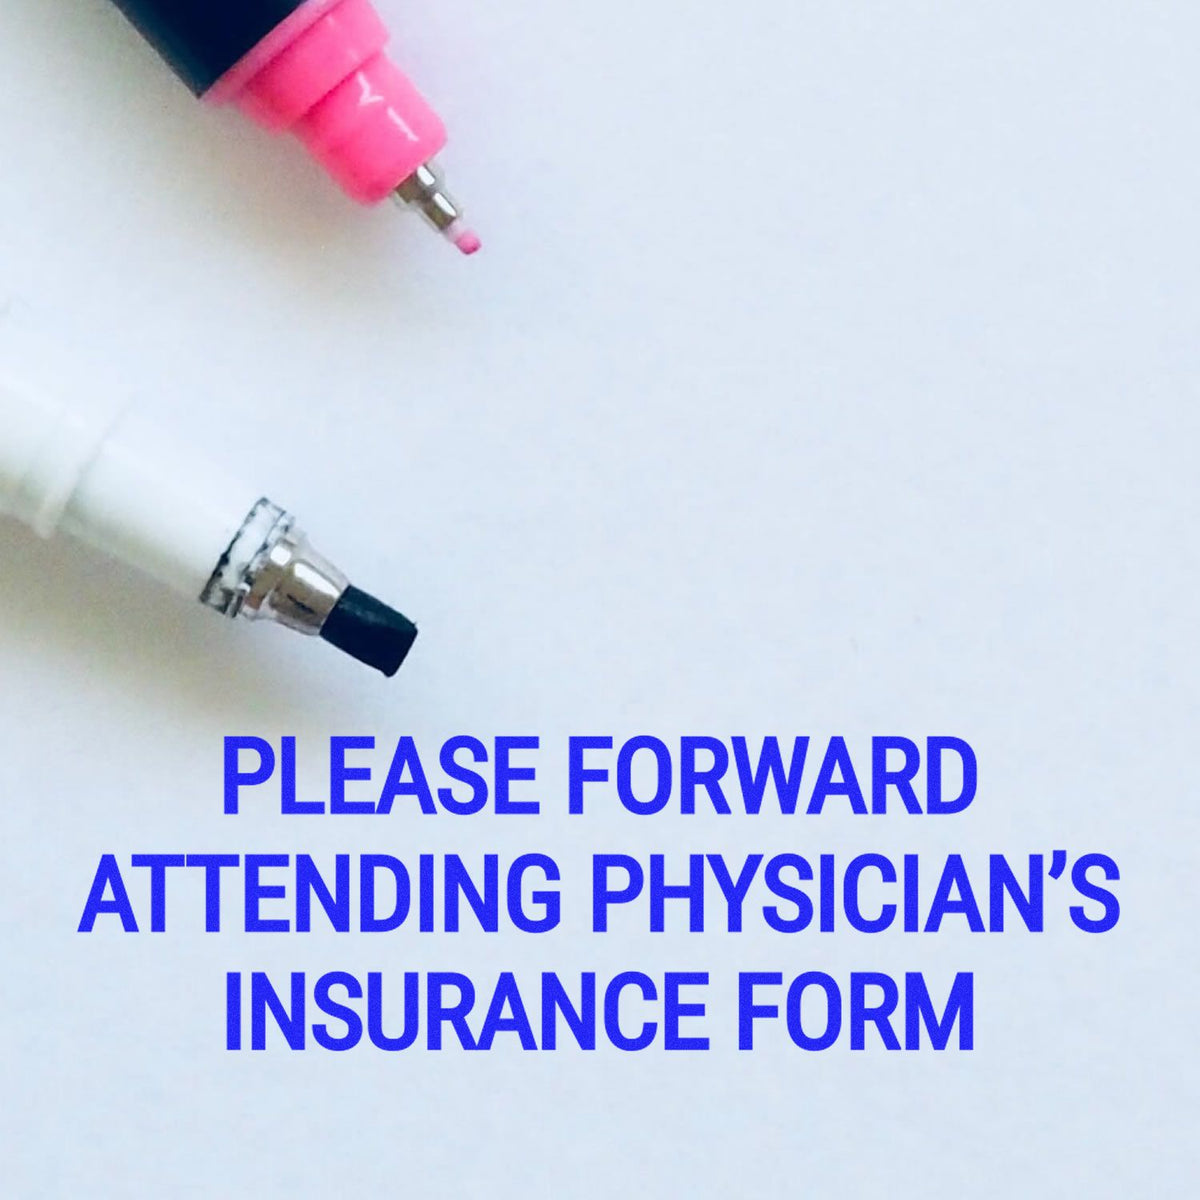 Large Please Forward Attending Physicians Insurance Form Rubber Stamp In Use Photo